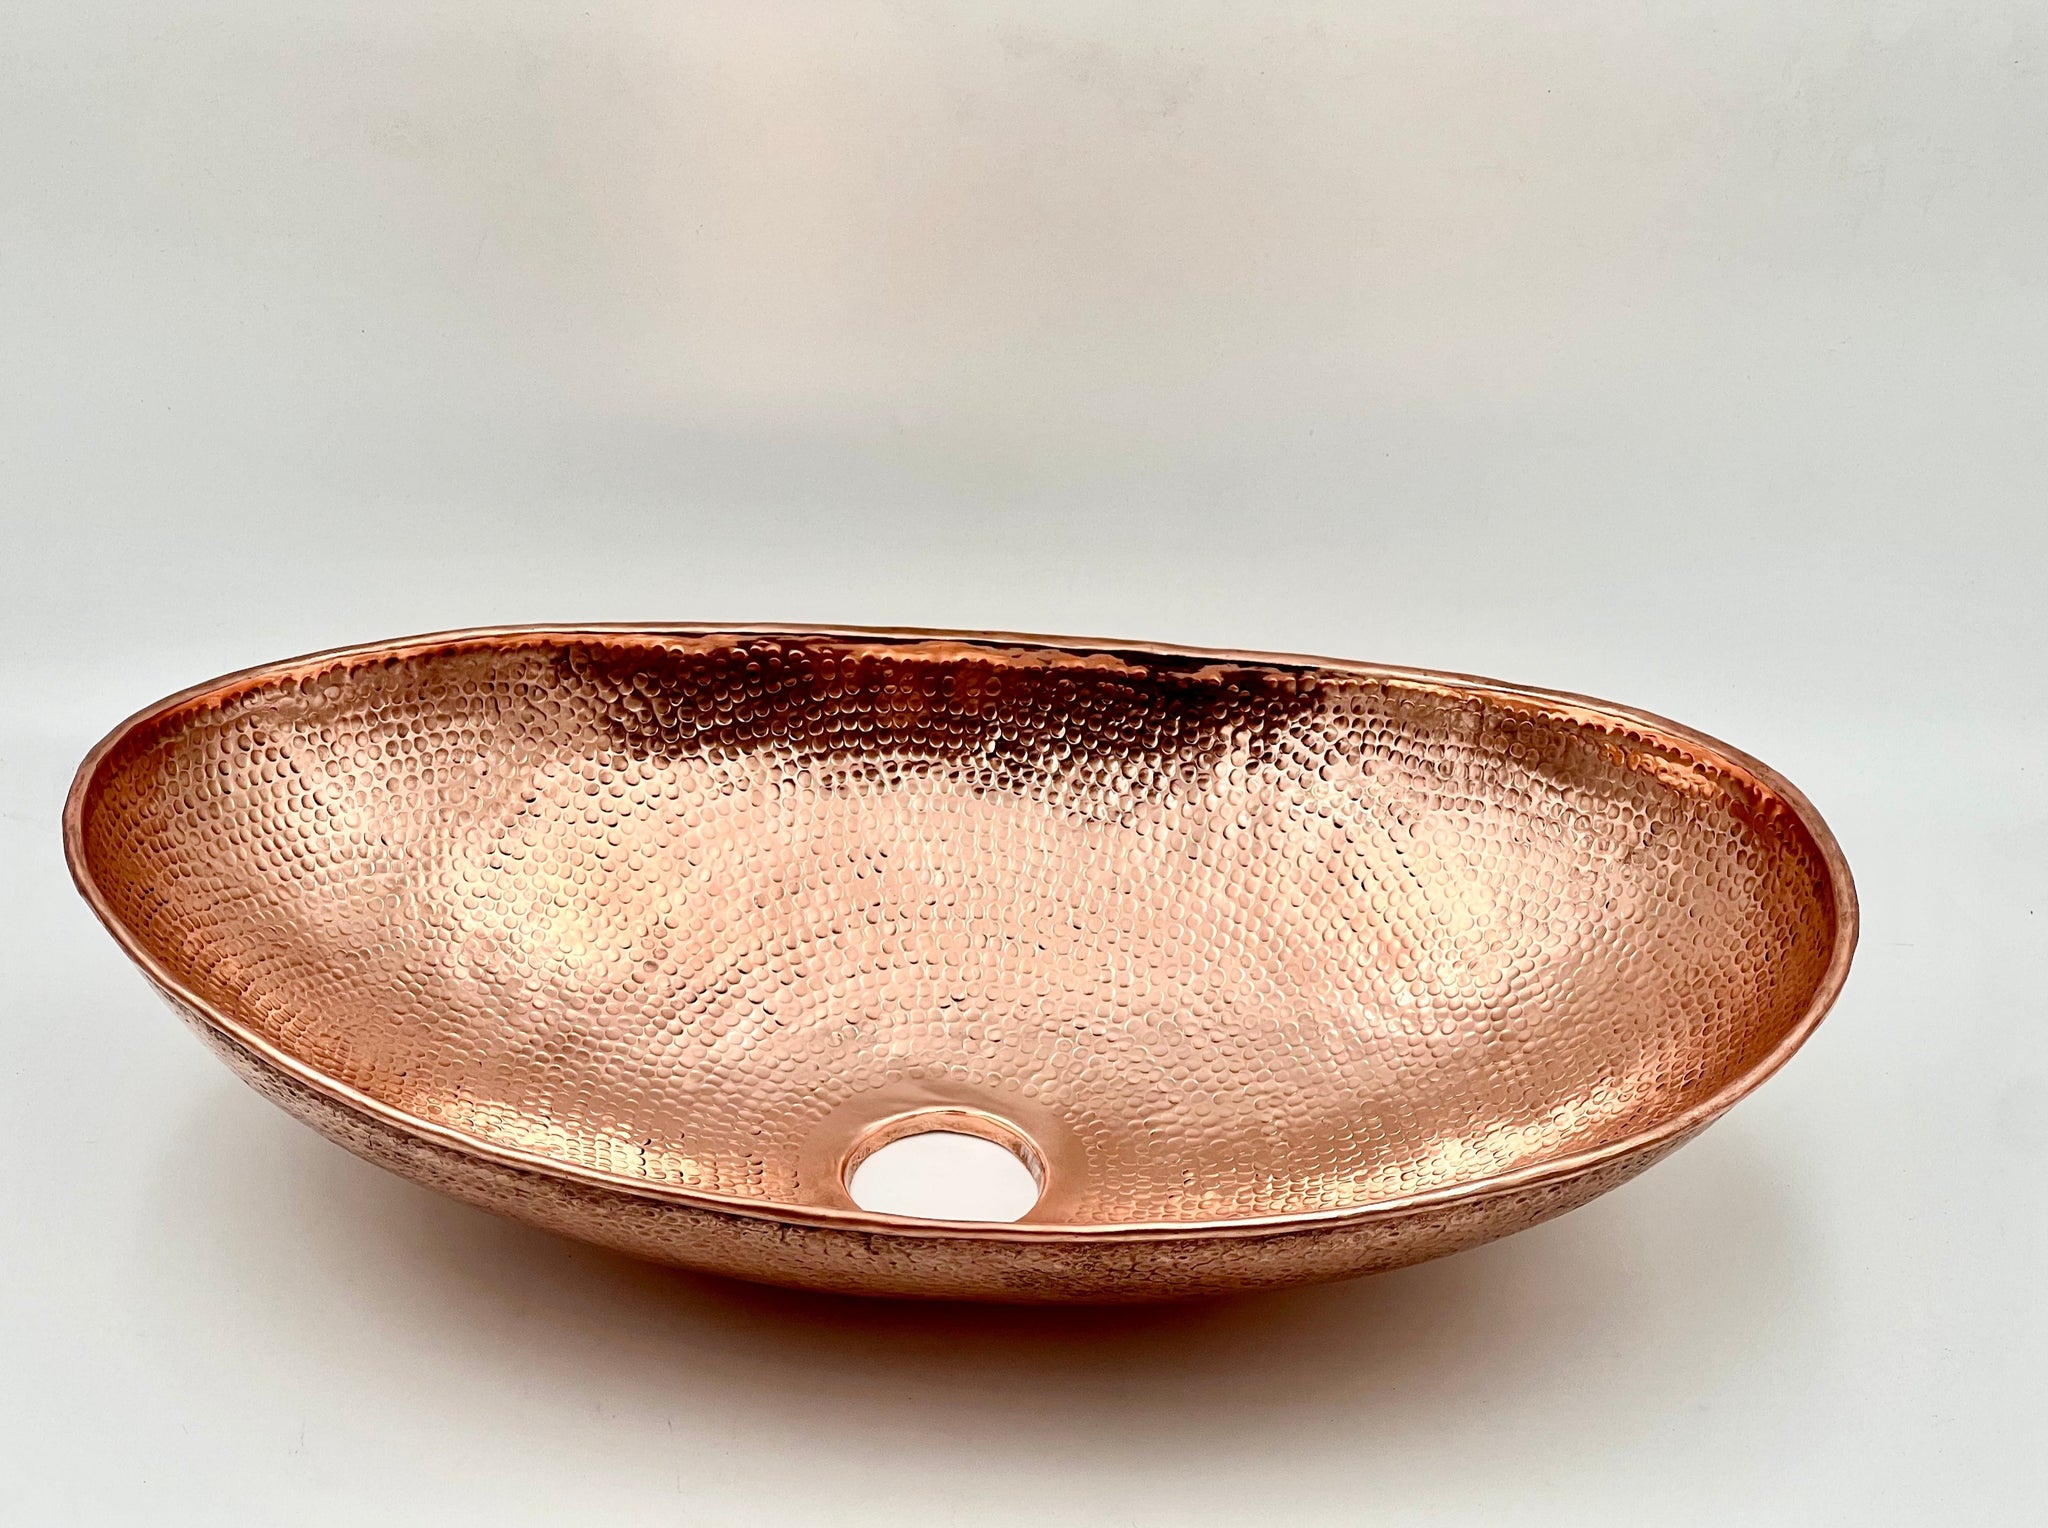 Unlacquered Solid Copper Sink - Oval Vessel Sink in Hammered Solid Copper